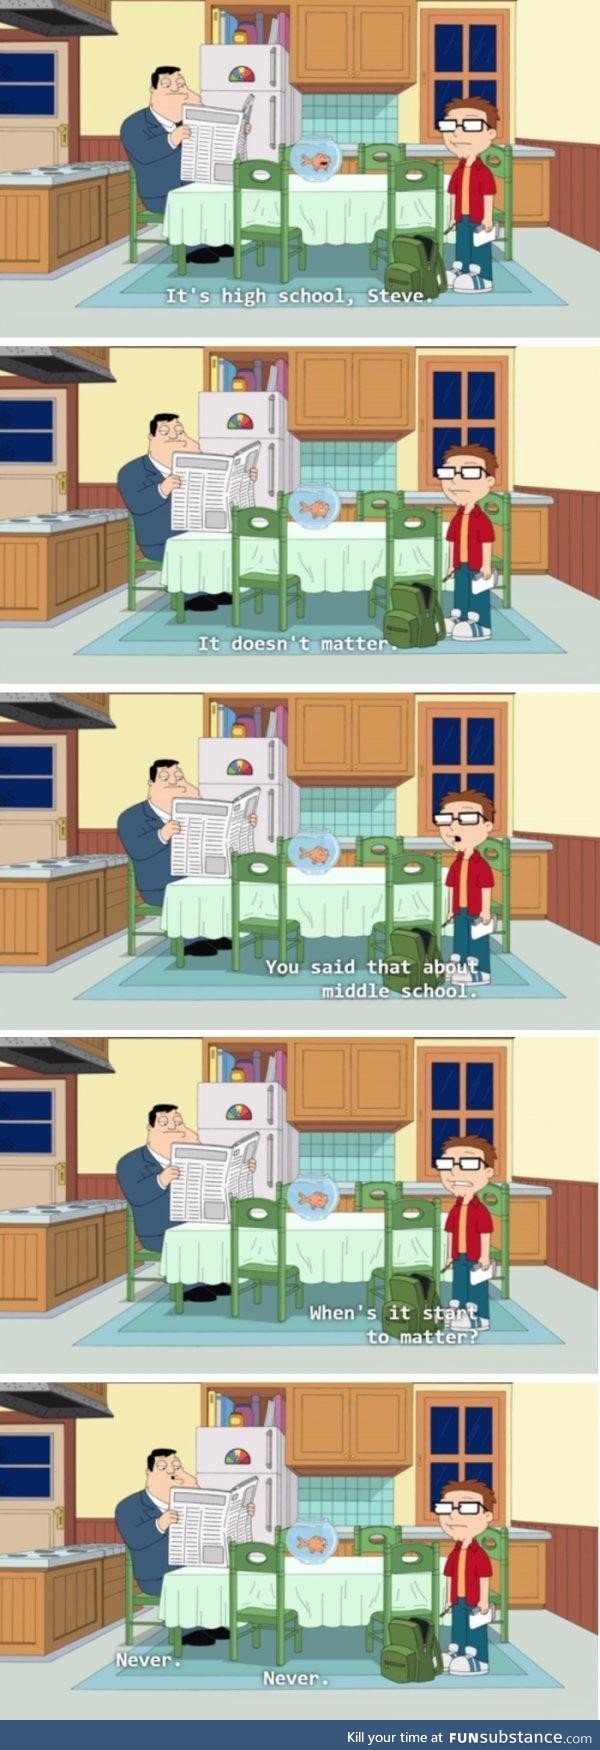 With school starting. Some truth from American Dad